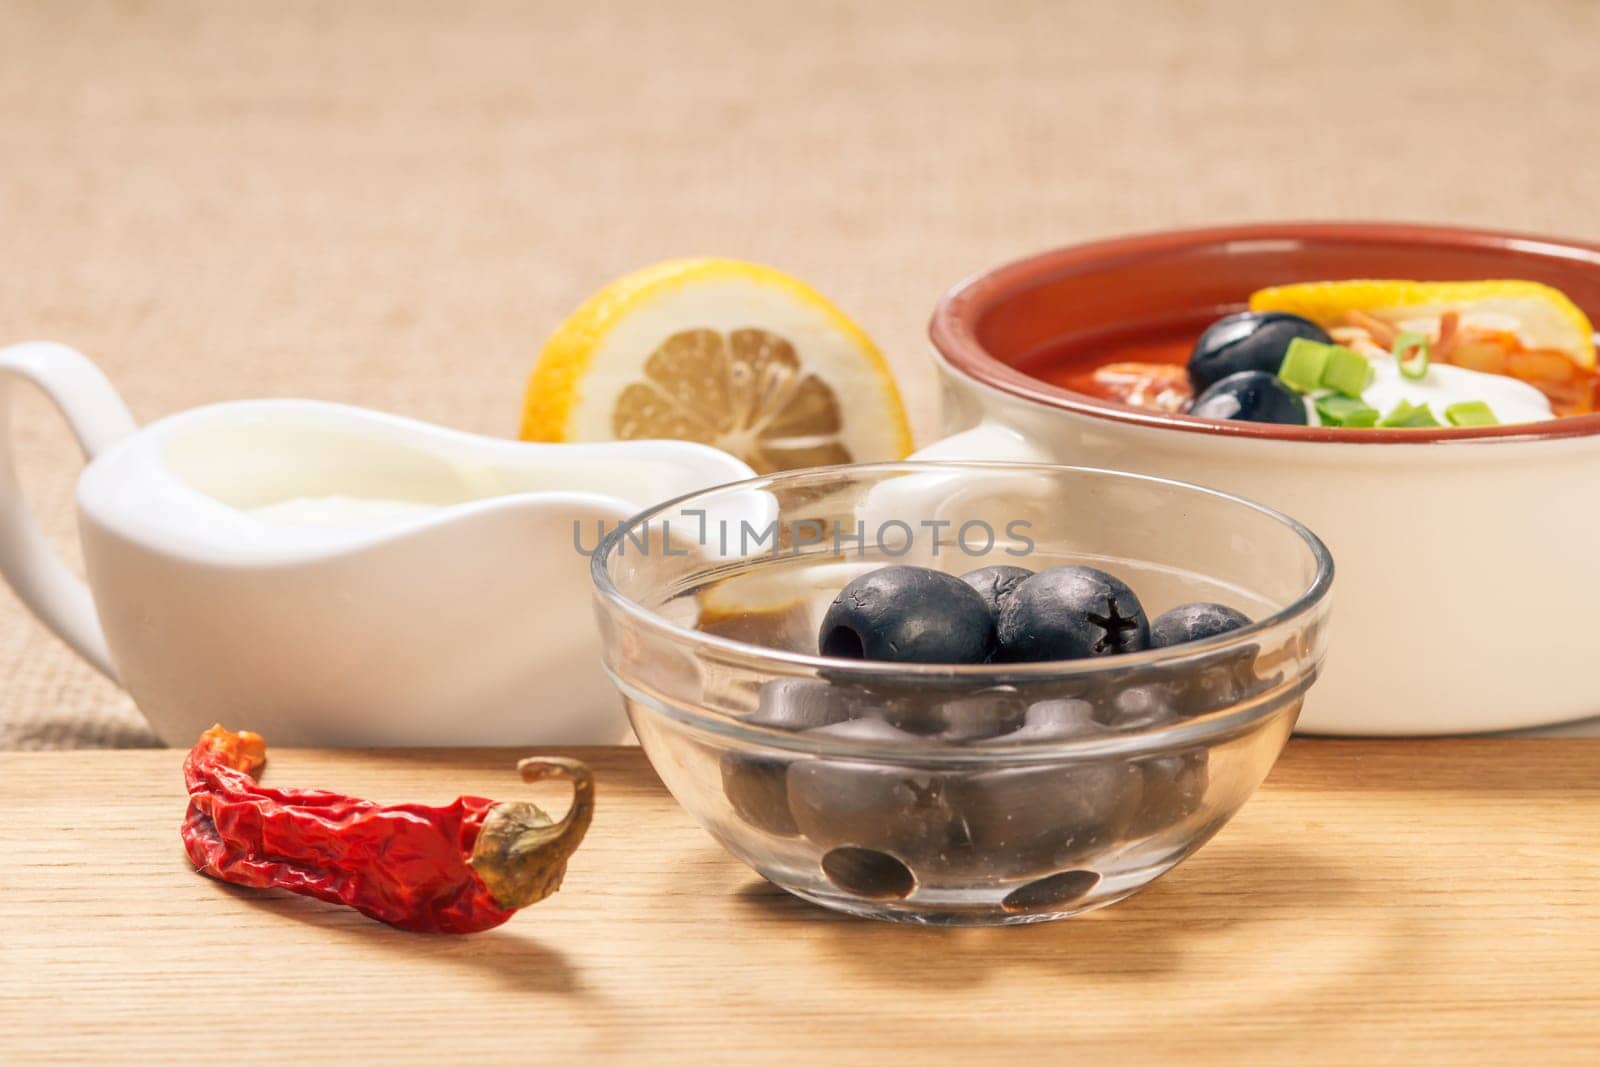 Glass bowl with black olives, dried red pepper on cutting board and ceramic soup bowl with saltwort, sauceboat with sour cream and cut lemon in the background.